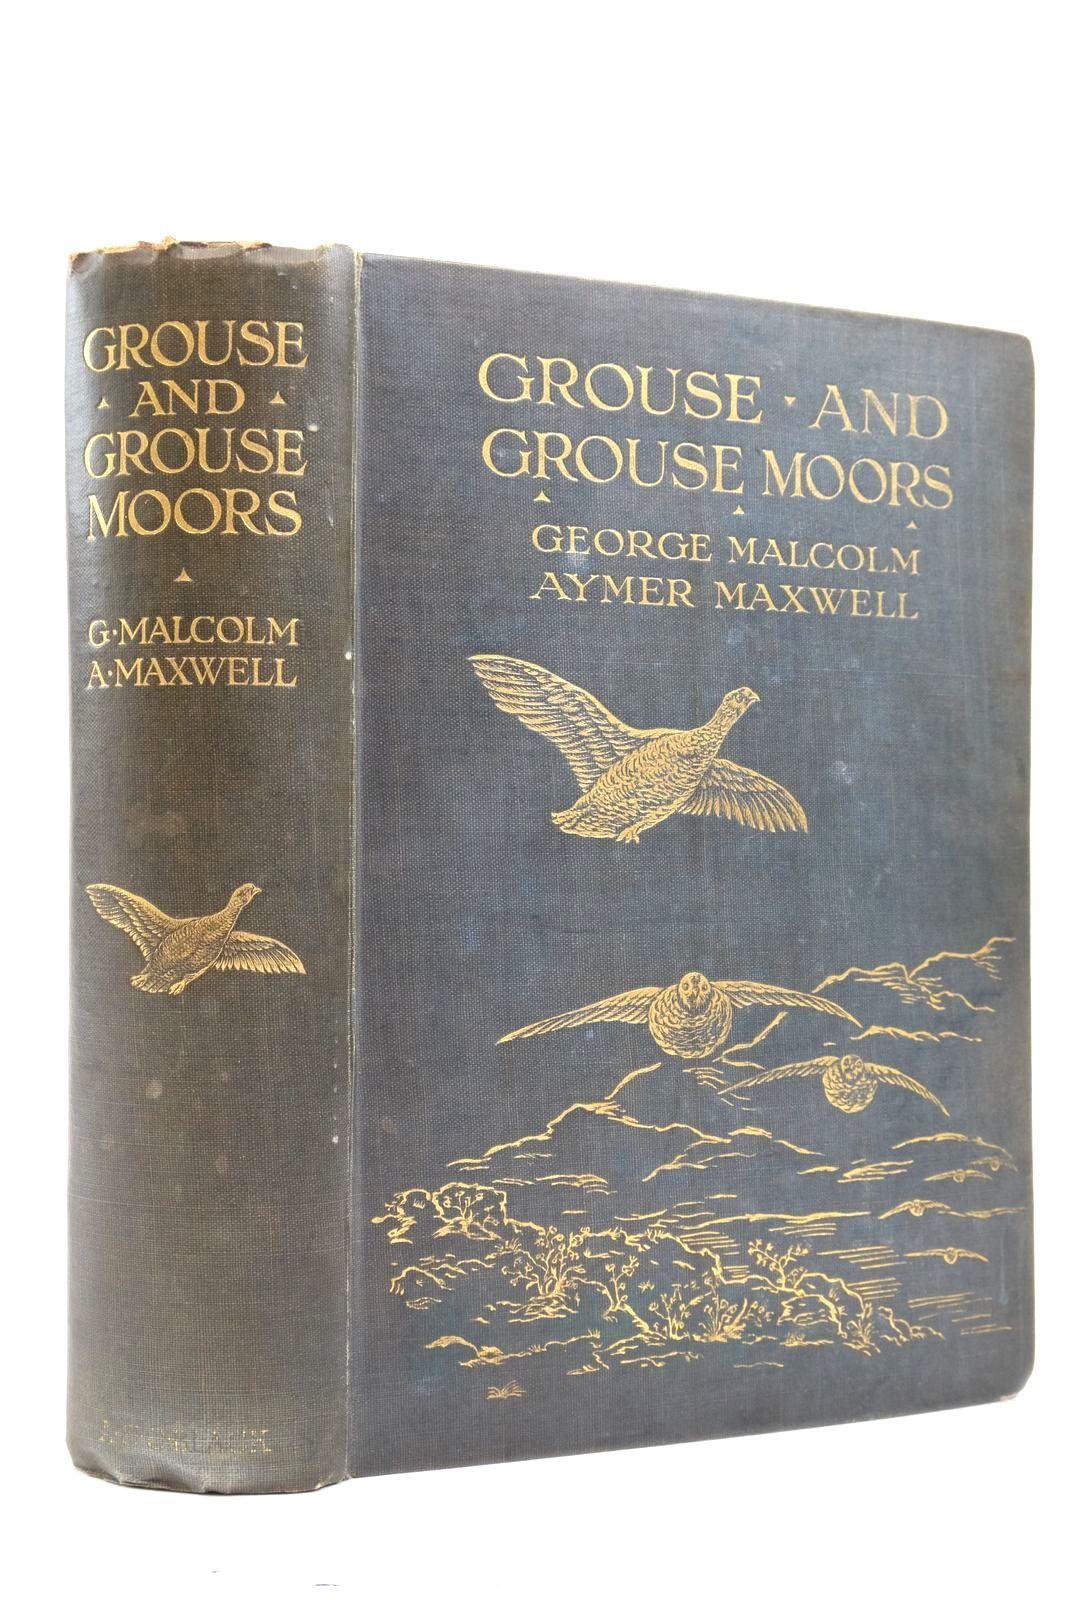 Photo of GROUSE AND GROUSE MOORS written by Malcolm, George
Maxwell, Aymer illustrated by Whymper, Charles published by Adam & Charles Black (STOCK CODE: 2137464)  for sale by Stella & Rose's Books